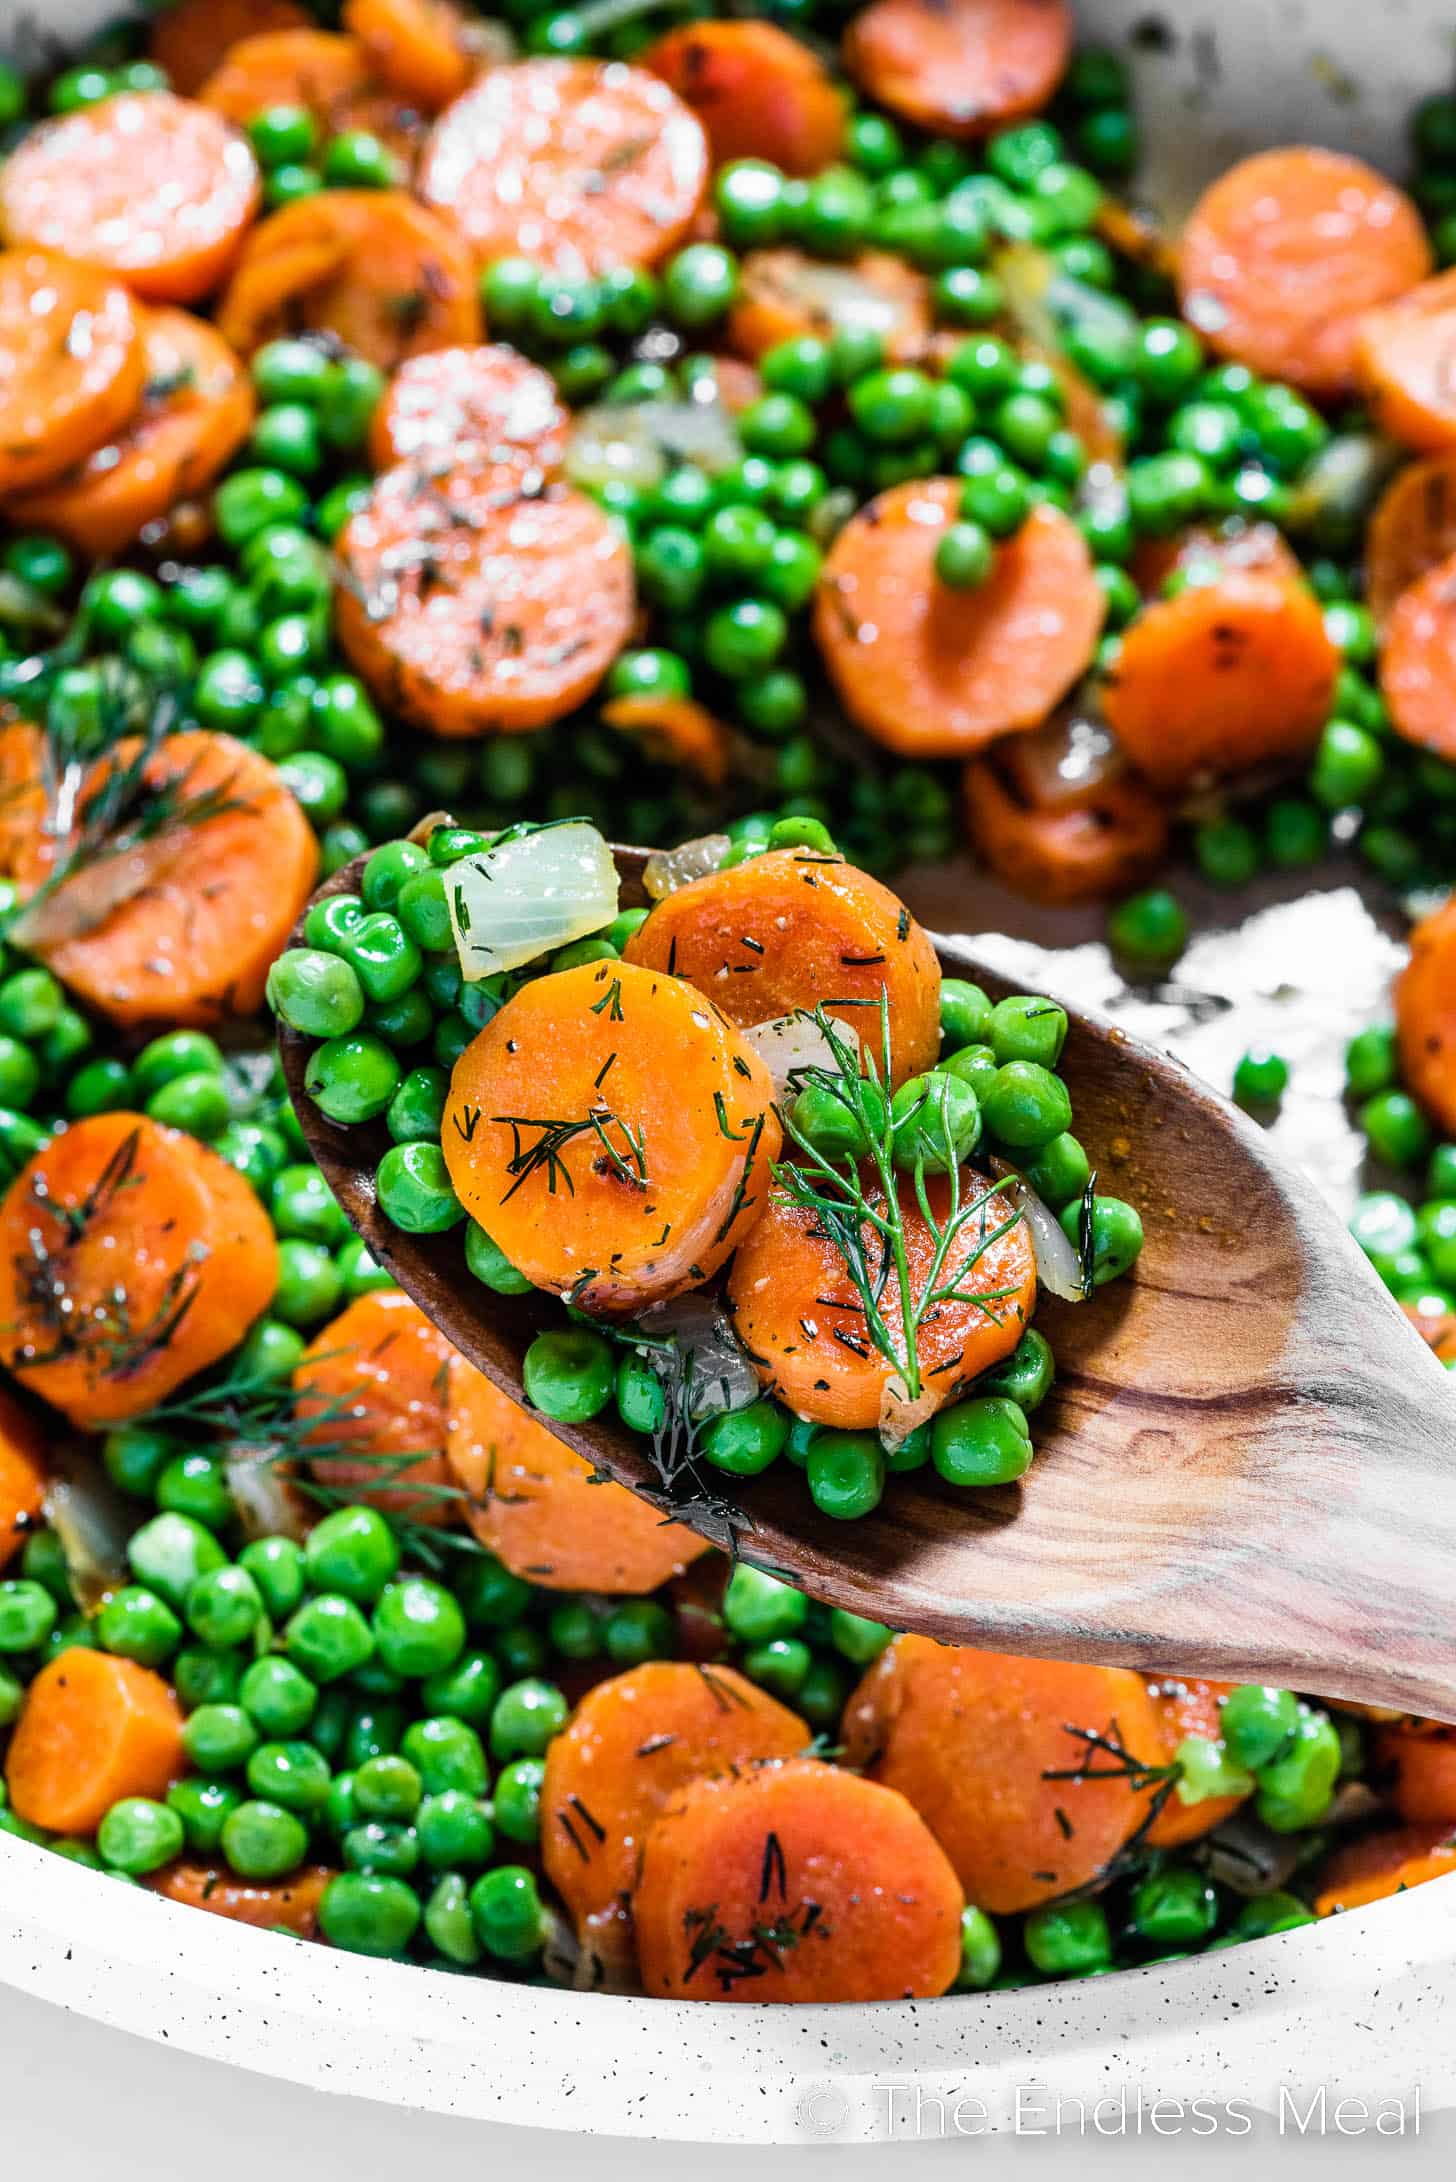 A close up of Peas and Carrots in a pan